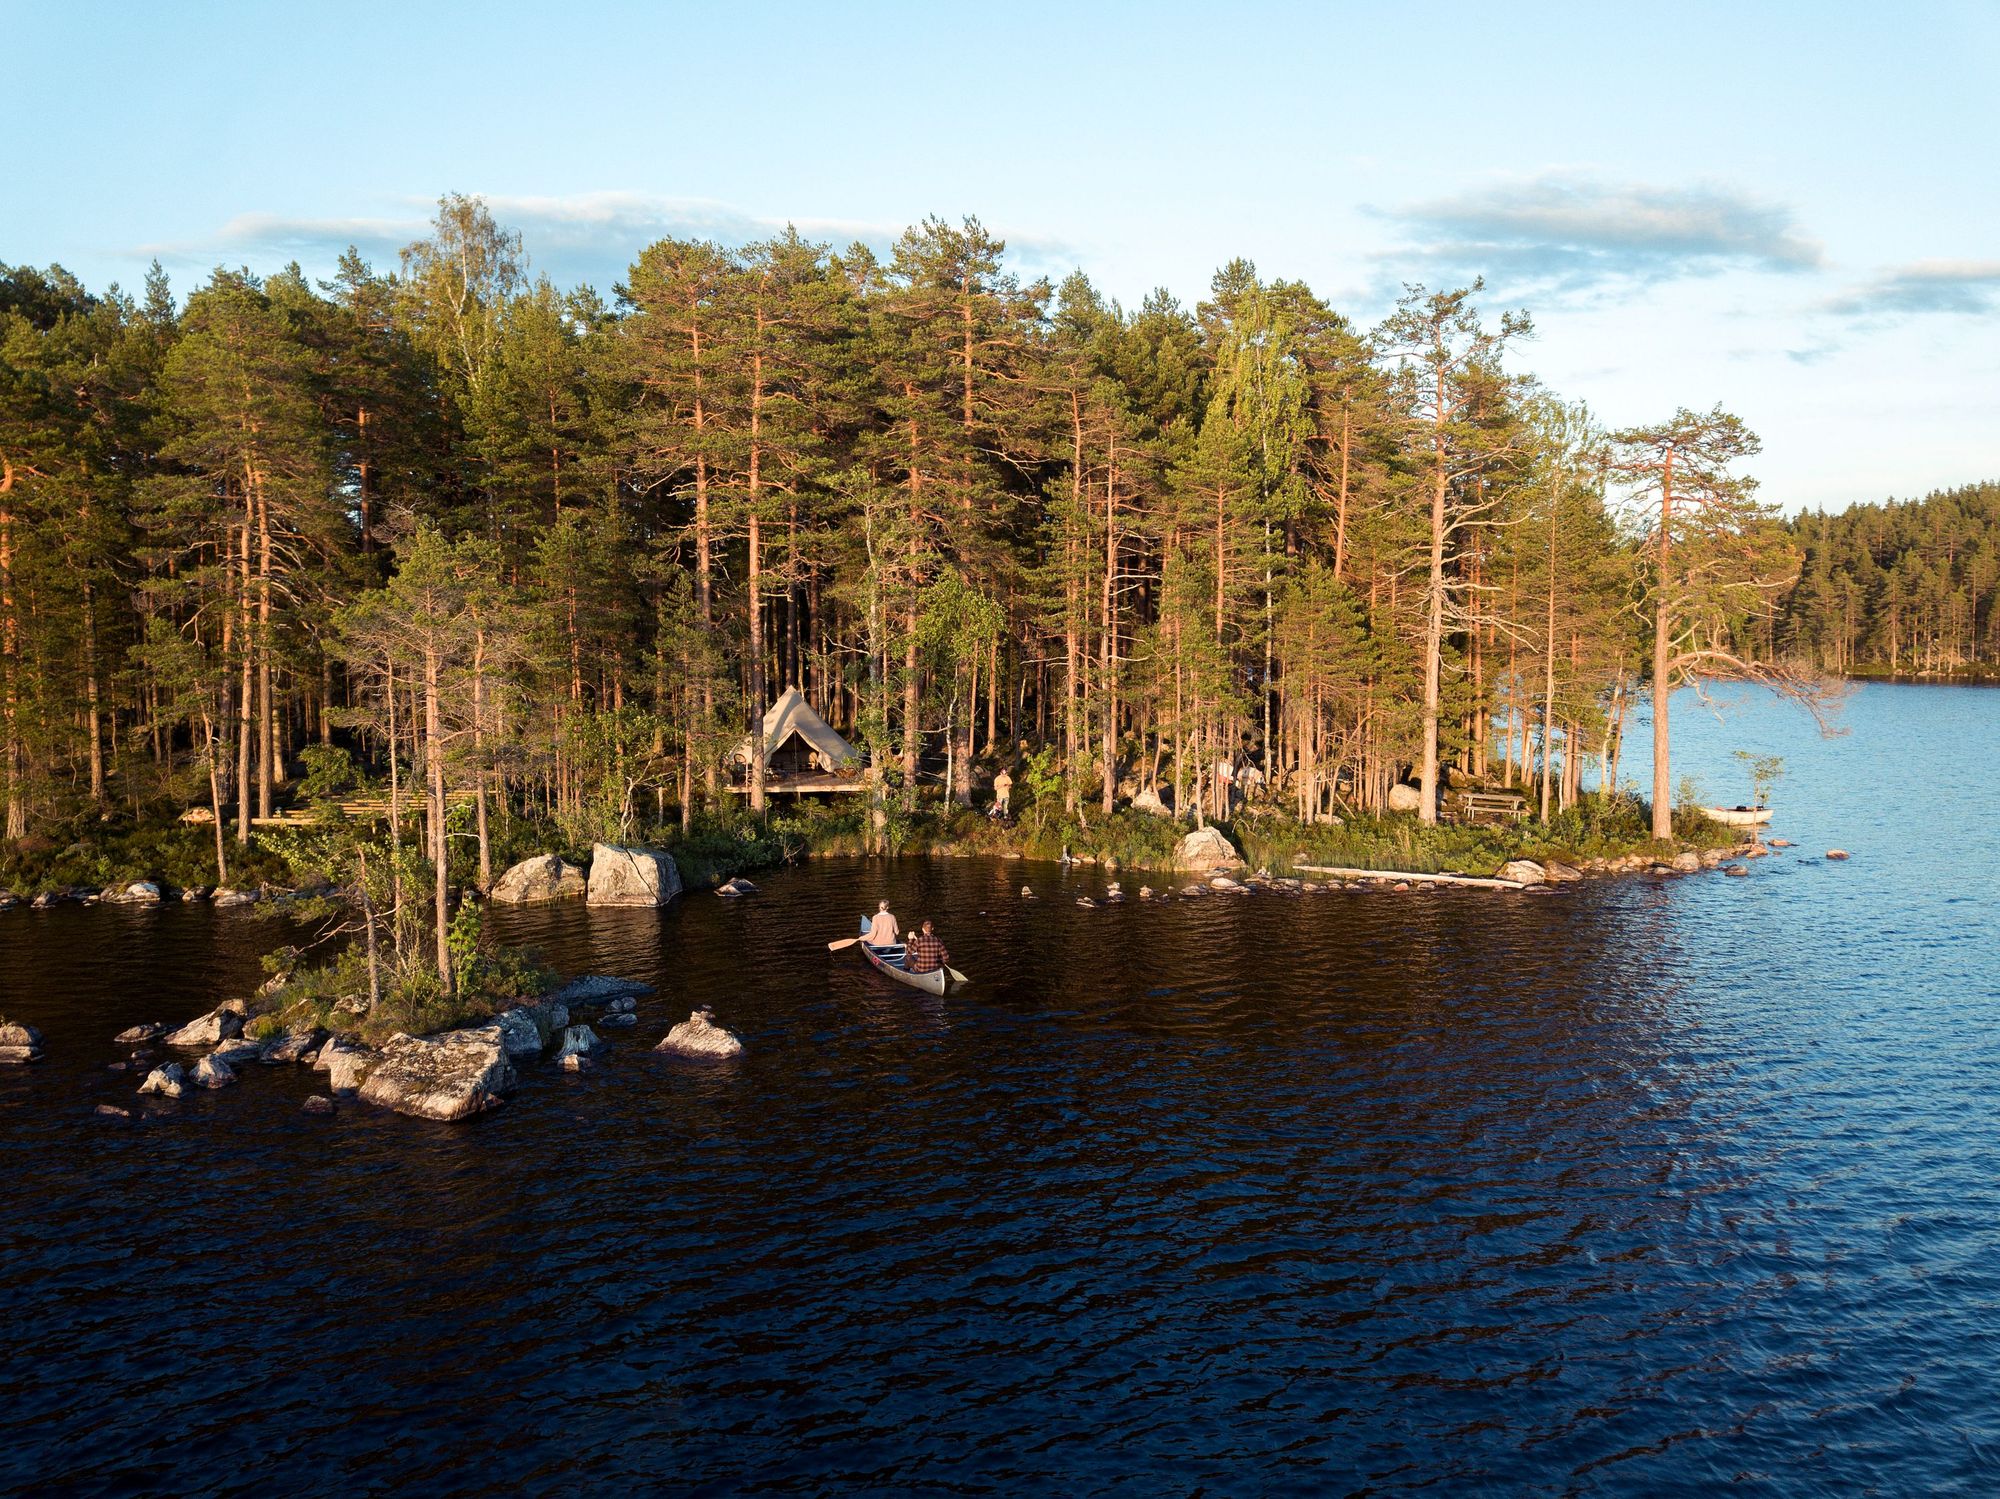 central sweden forests wind farms tourism protecting